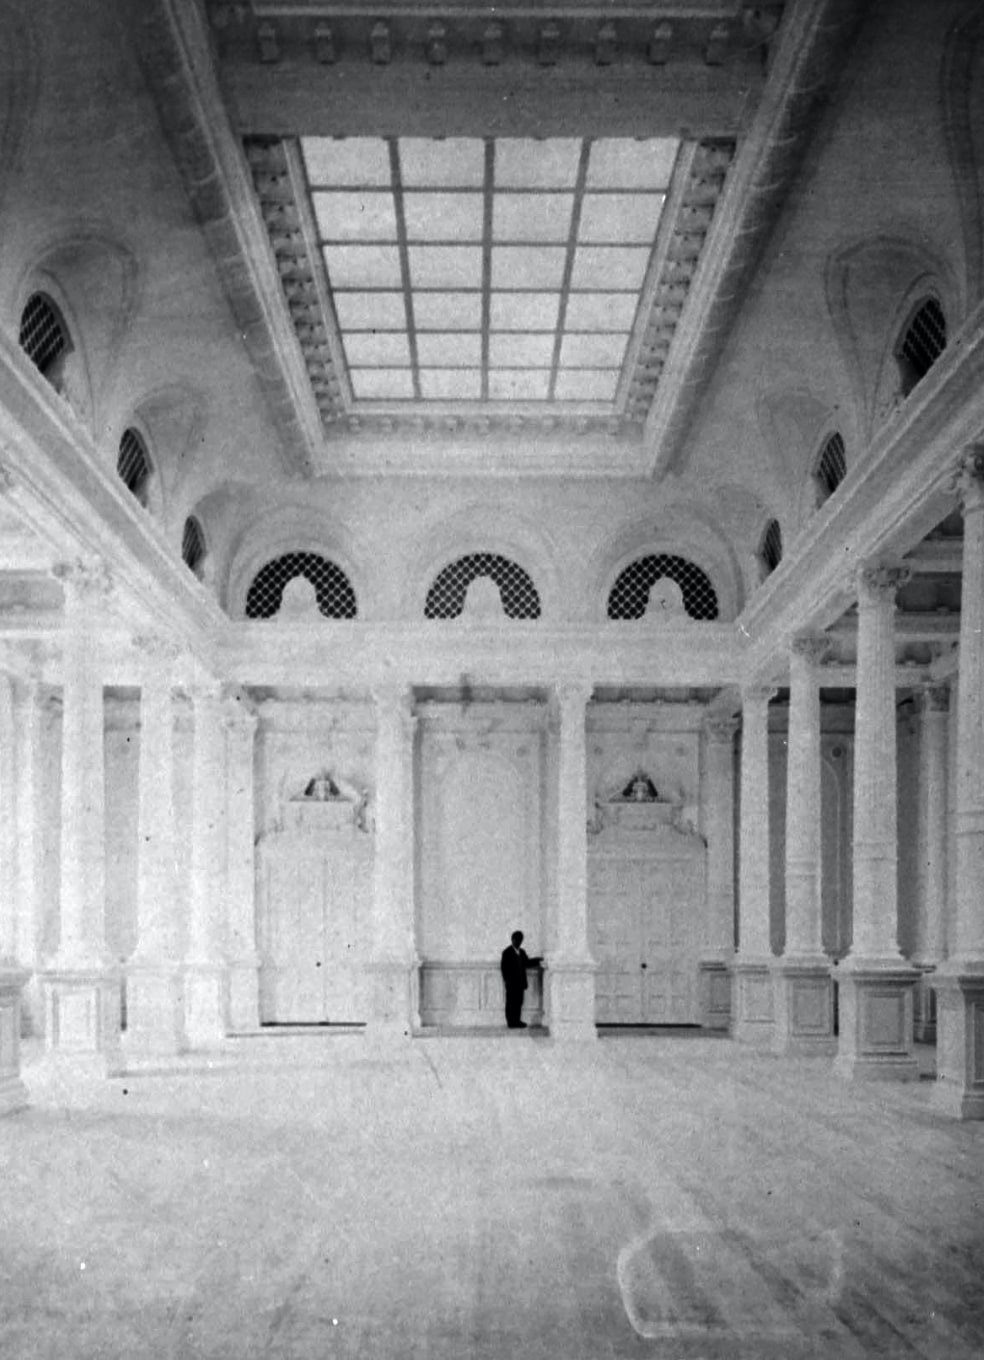 The central gallery of the newly constructed Main Hall